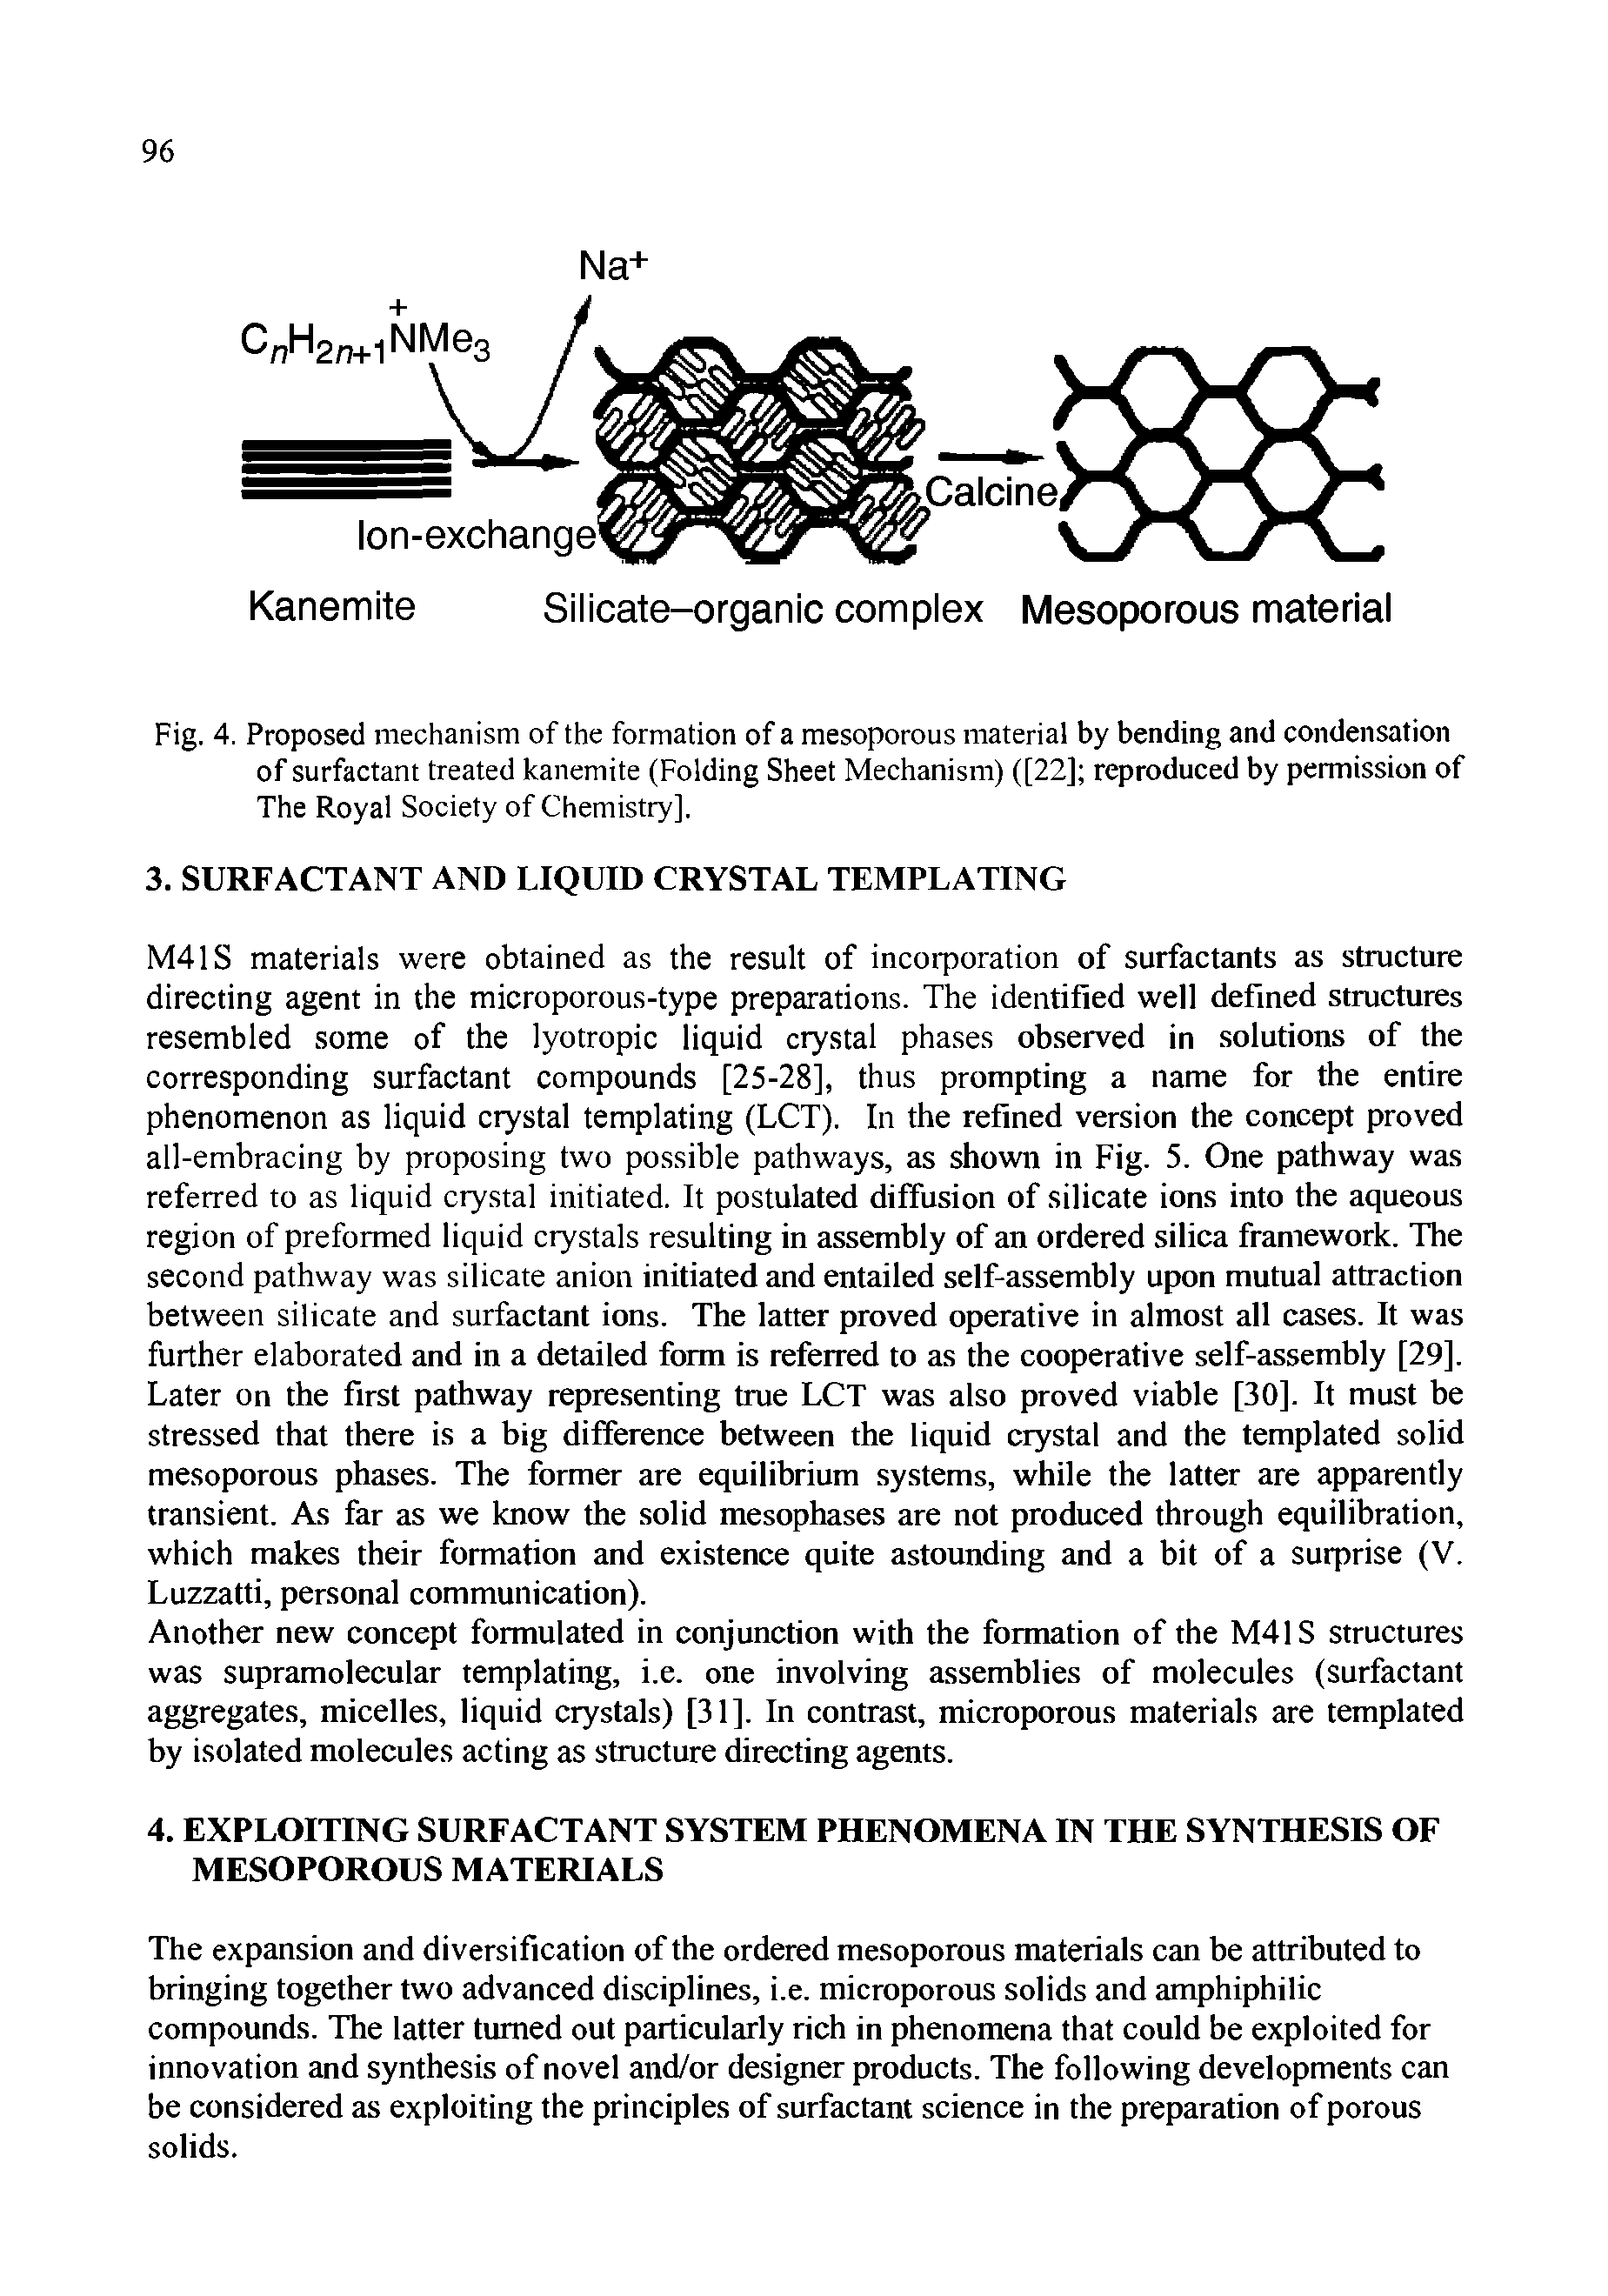 Fig. 4. Proposed mechanism of the formation of a mesoporous material by bending and condensation of surfactant treated kanemite (Folding Sheet Mechanism) ([22] reproduced by permission of The Royal Society of Chemistry],...